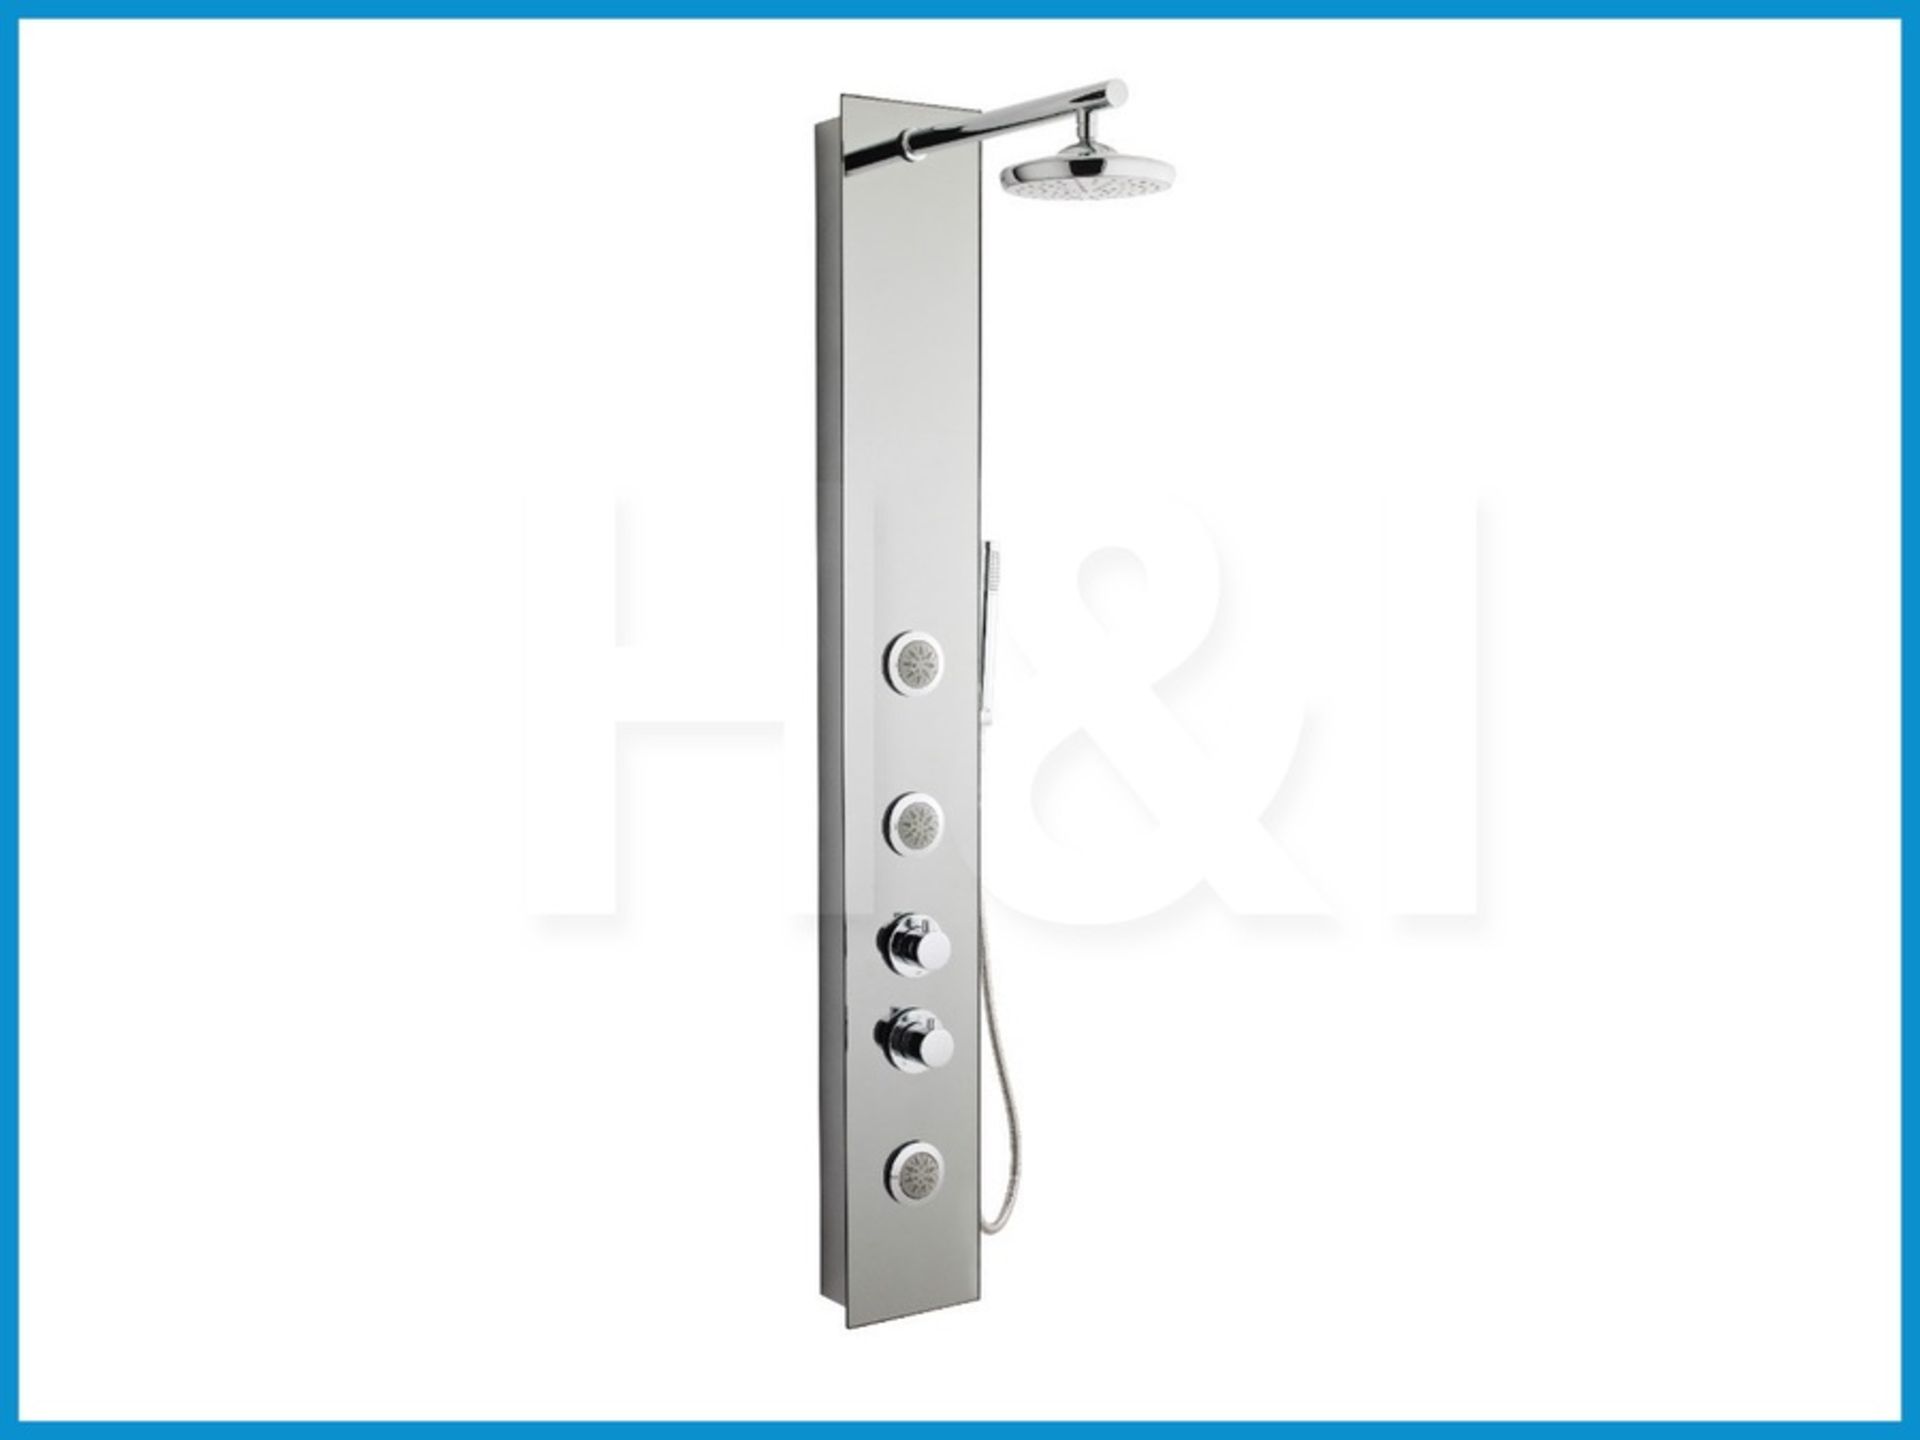 Designer Ultra AS310 Seymour chrome thermostatic shower panel. New and boxed. Suggested